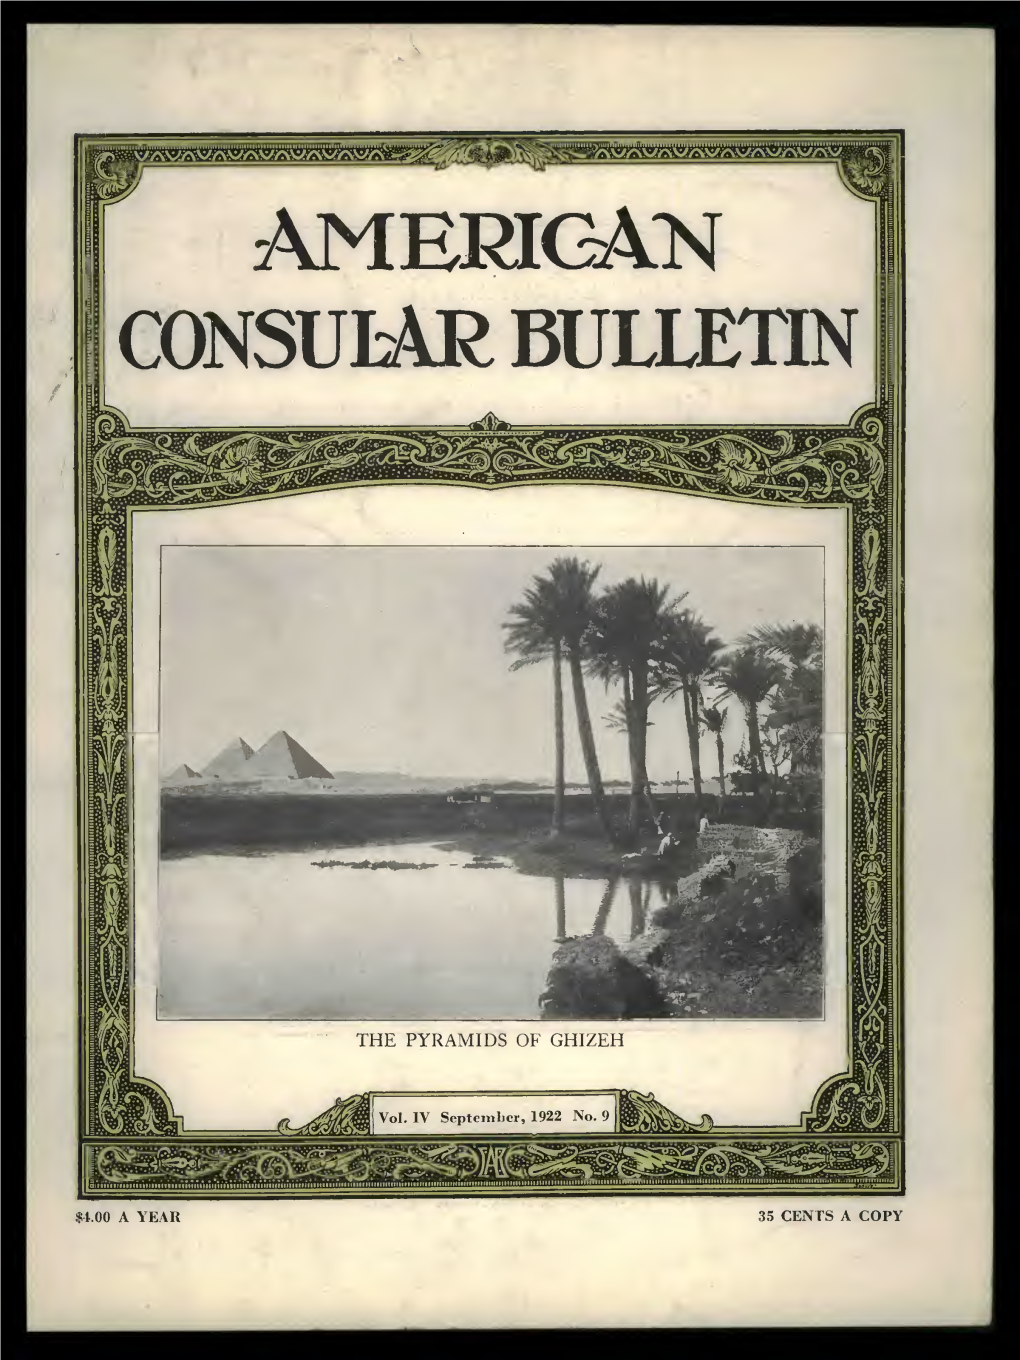 The Foreign Service Journal, September 1922 (American Consular Bulletin)